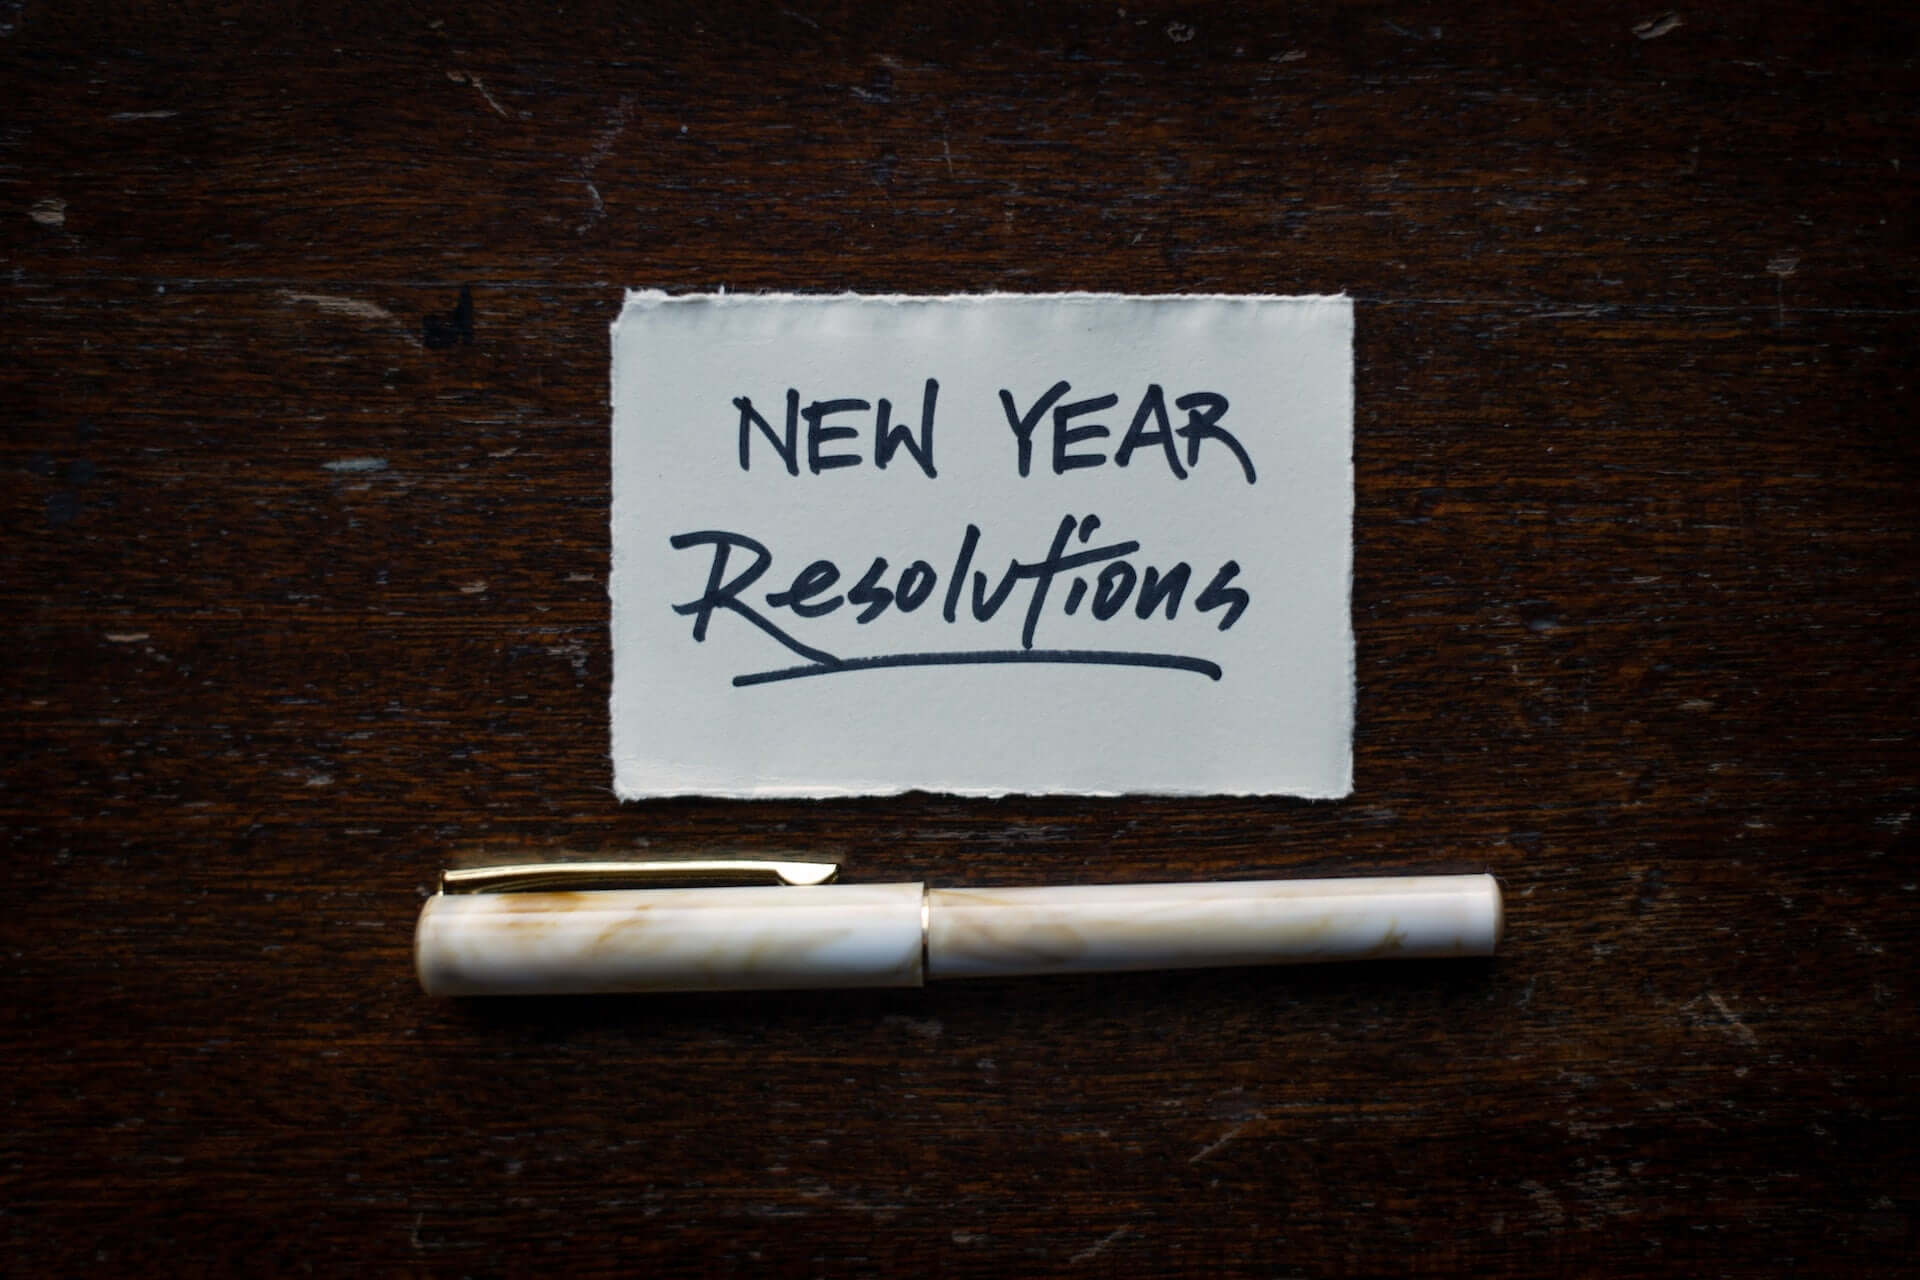 A piece of paper with "New Year Resolutions" written on it. A capped pen lies beneath it.